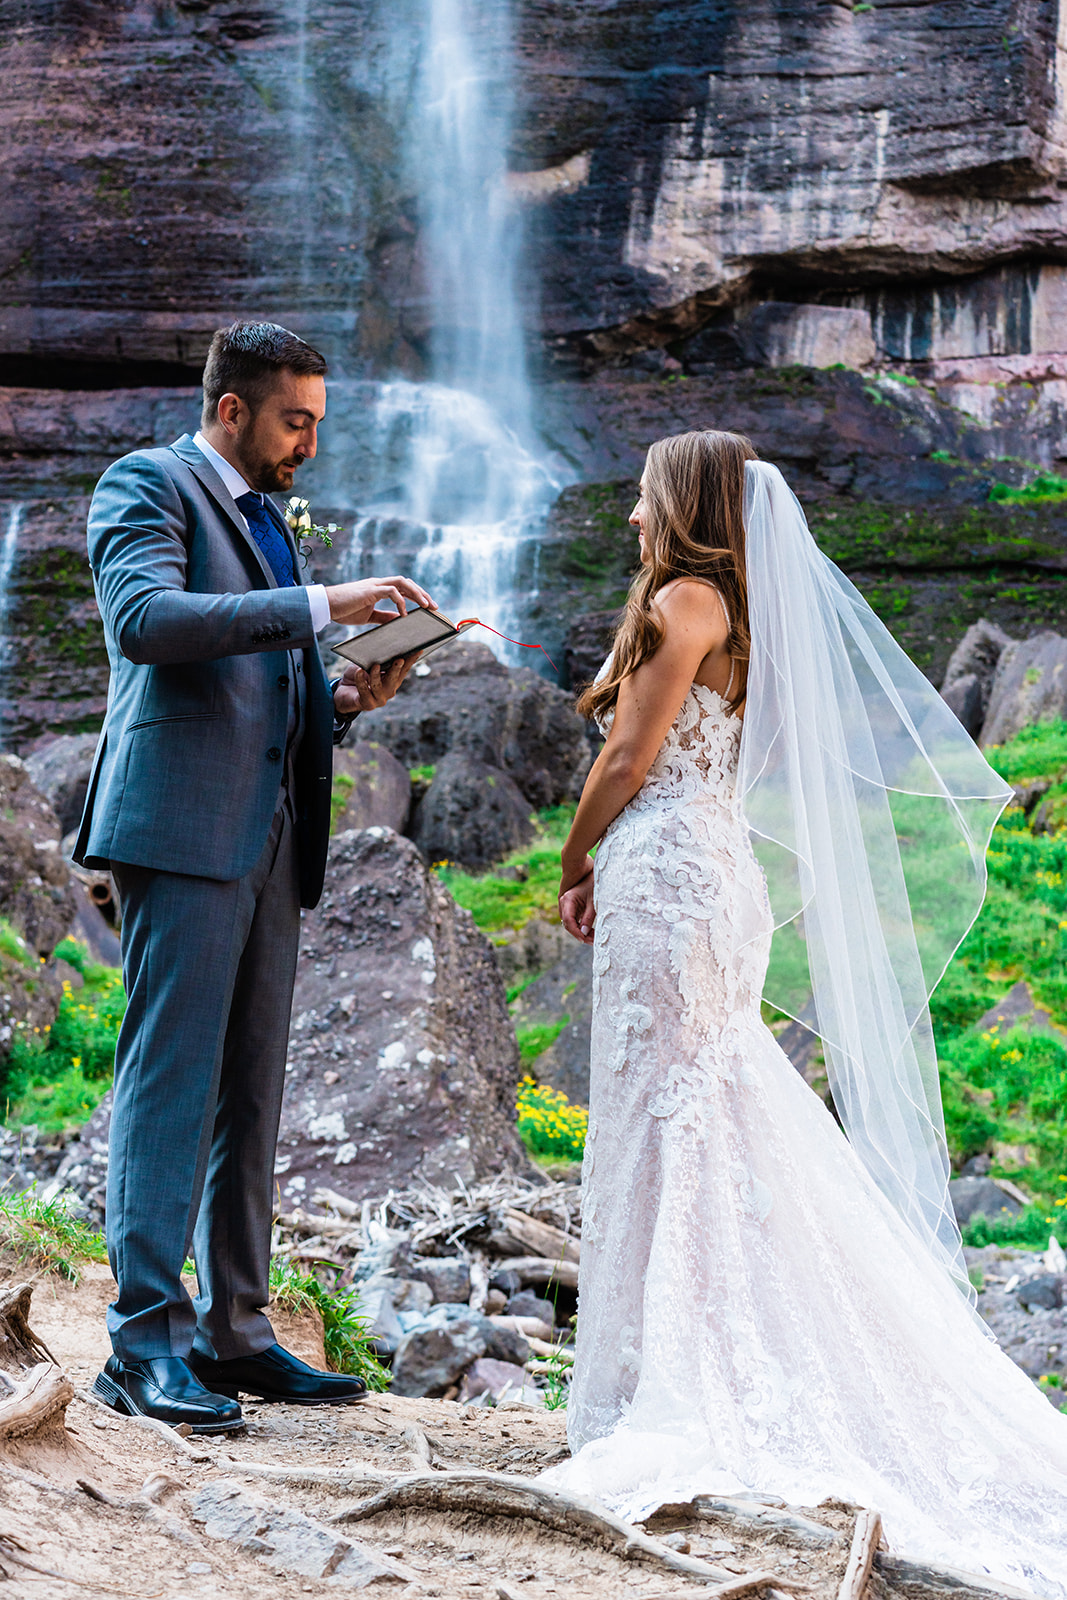 Bride and groom exchanging vows in front of Bridal Veil Falls